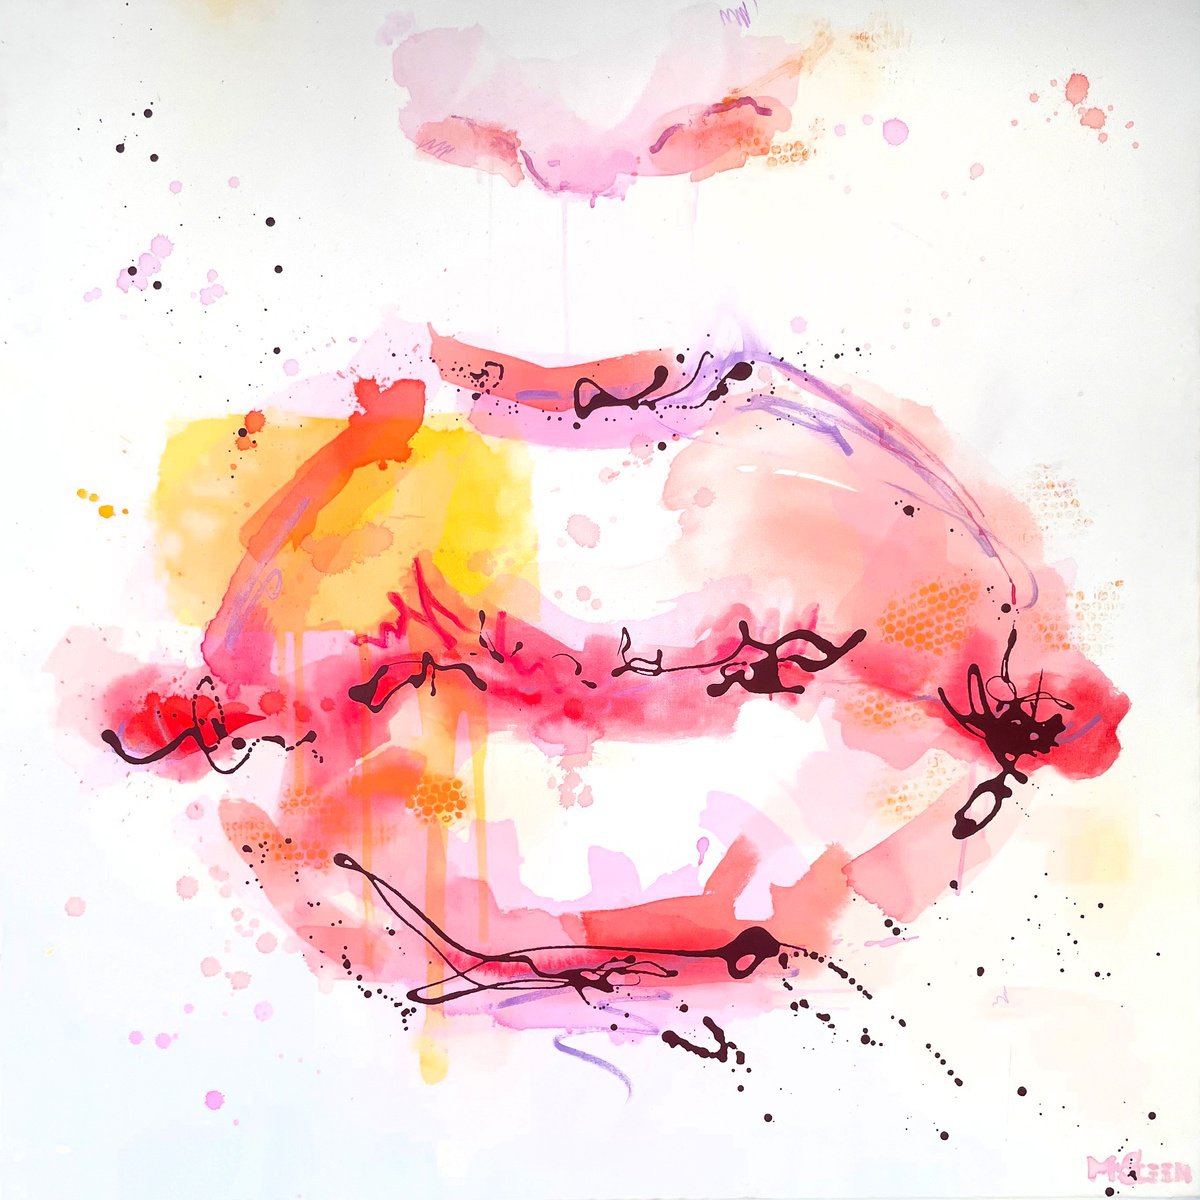 Red lips (out on exhibition) by Monique van Steen